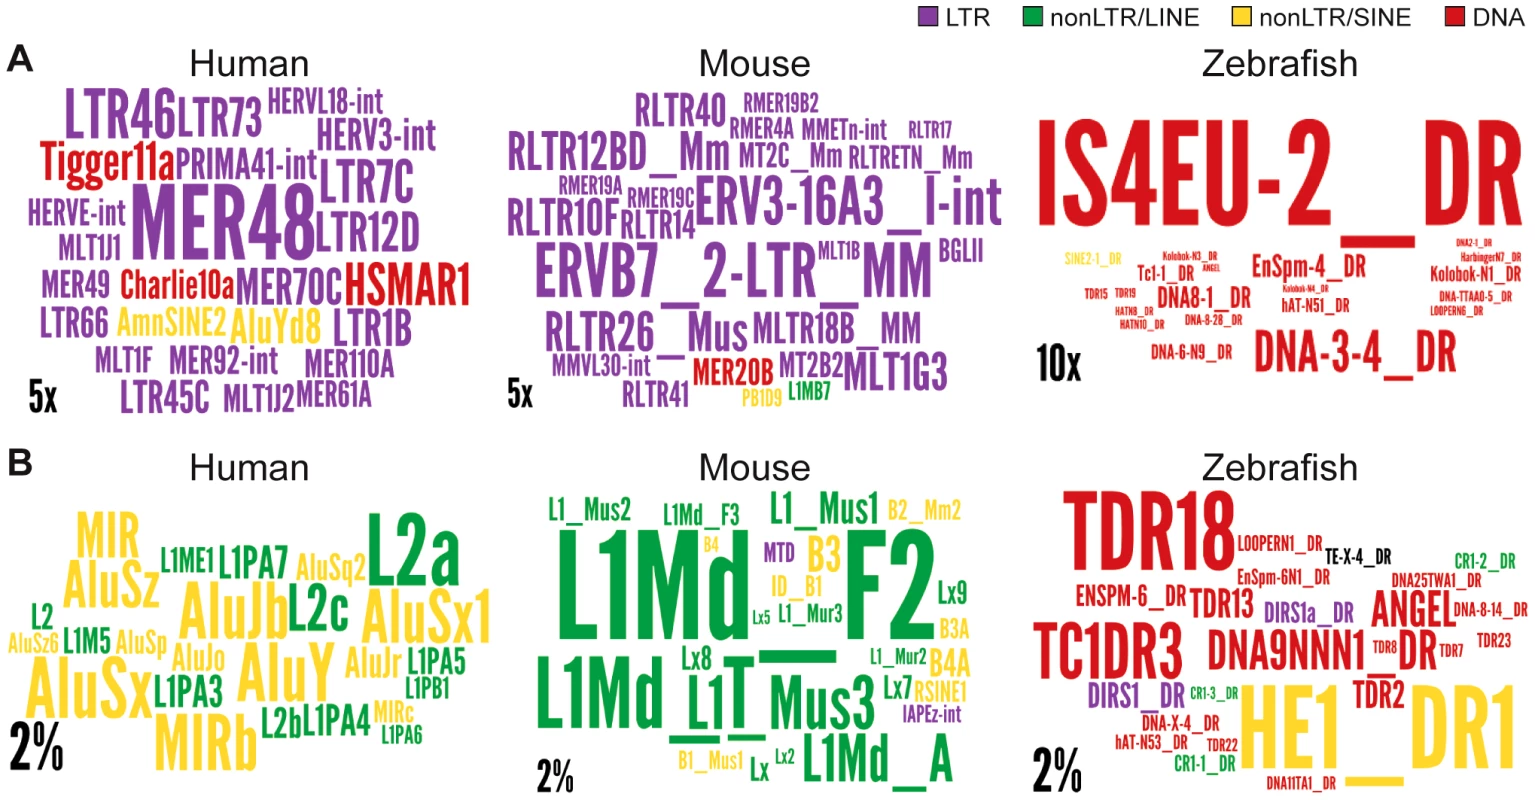 Wordle representation of the most enriched TE families in lncRNAs.